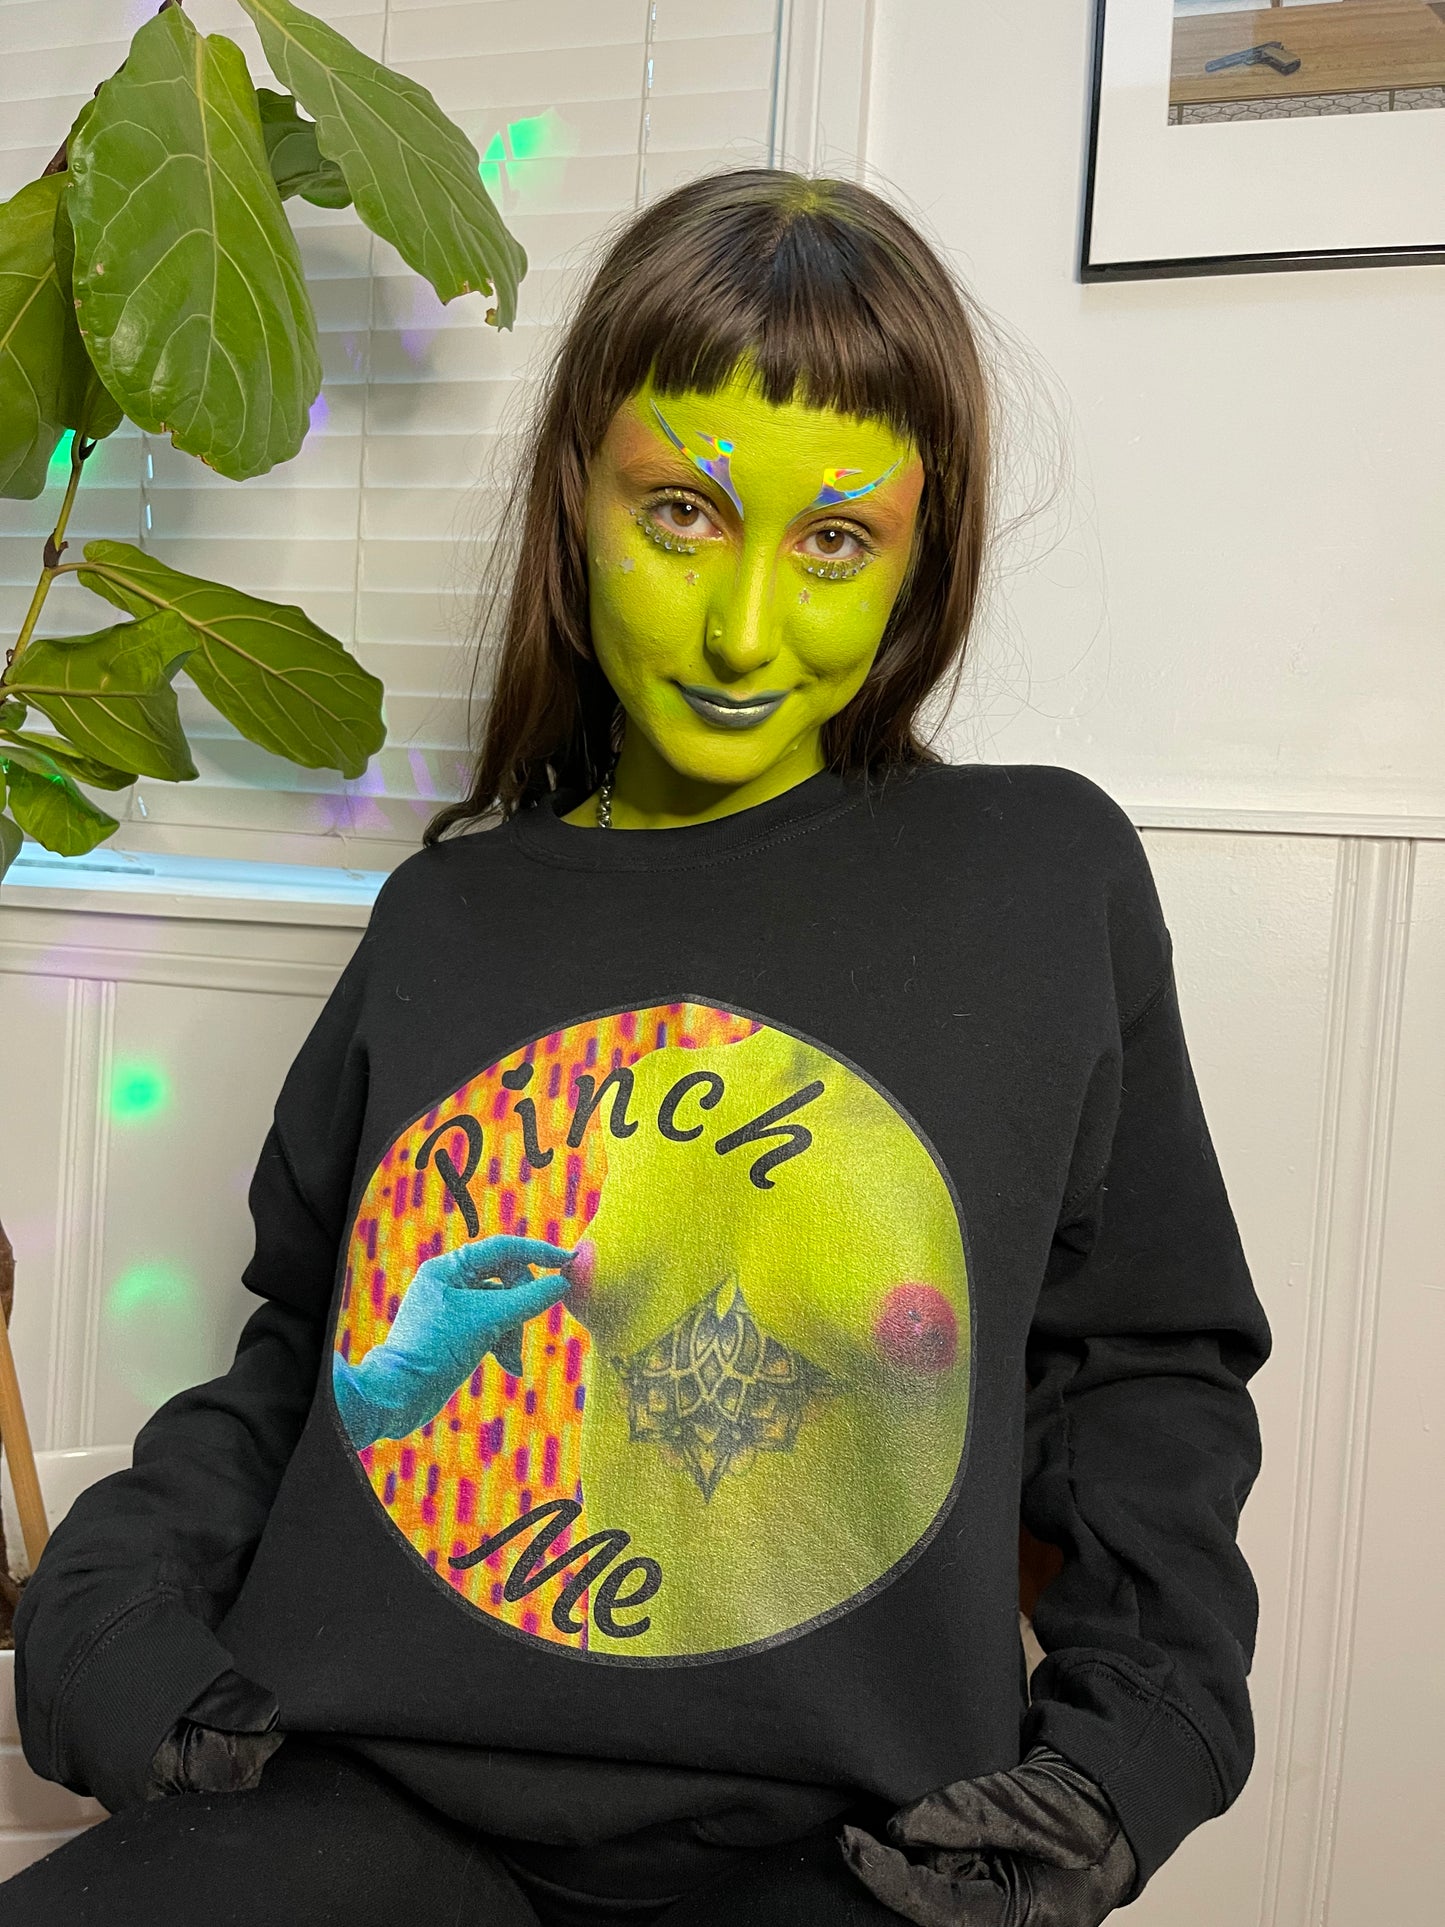 pinch me sweatshirt - available in sizes S-5XL